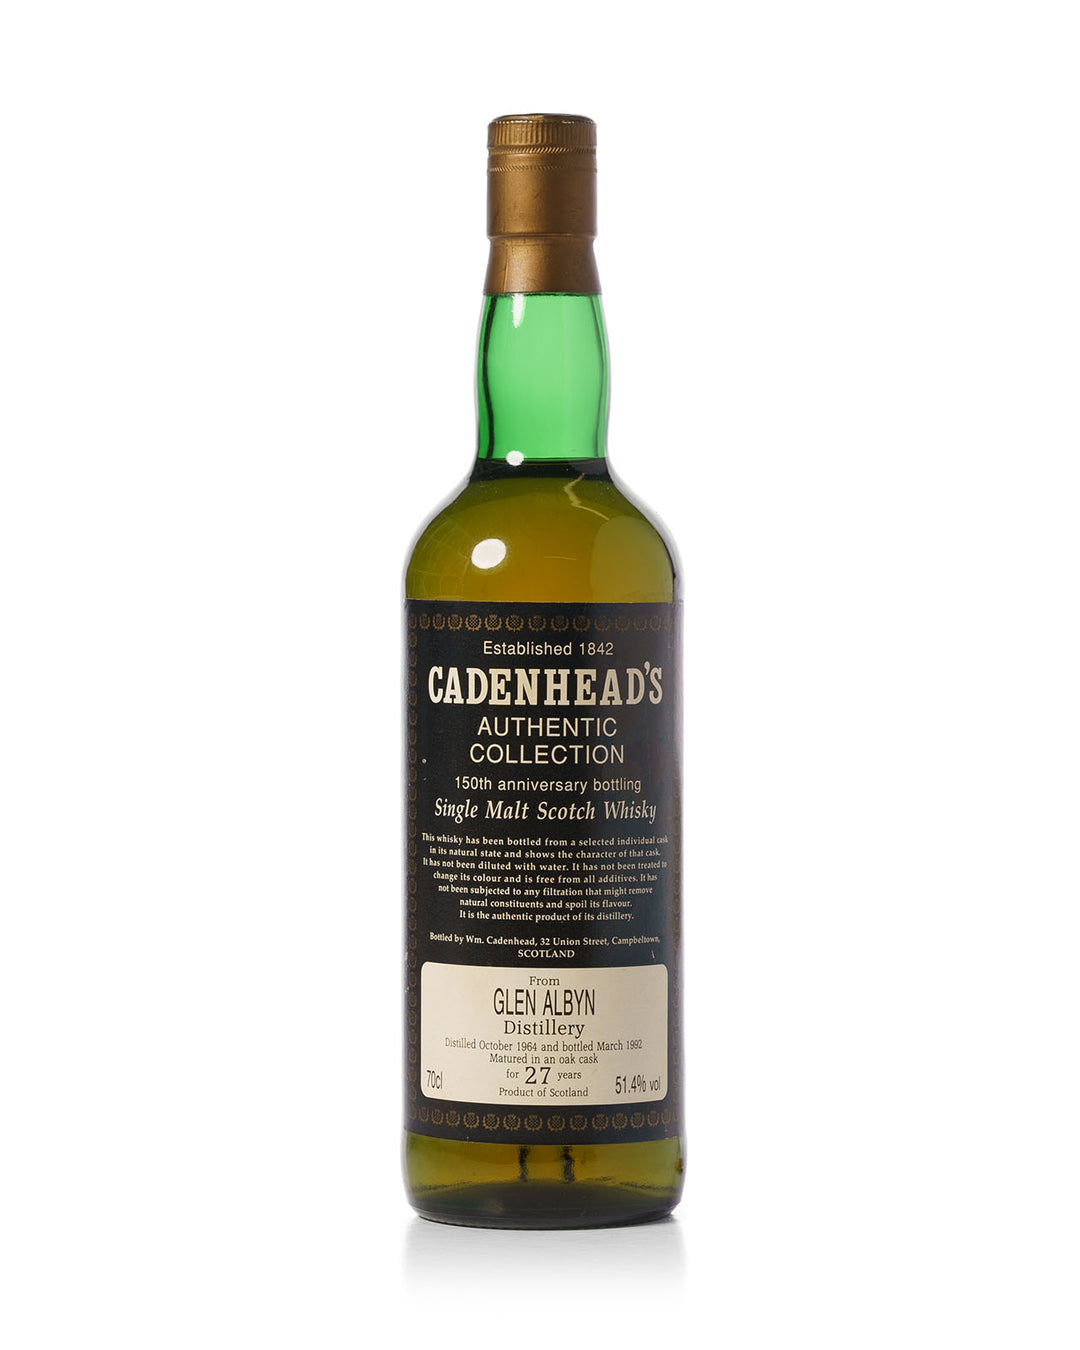 Glen Albyn 1964 27 Year Old Cadenhead's Authentic Collection Bottled 1992